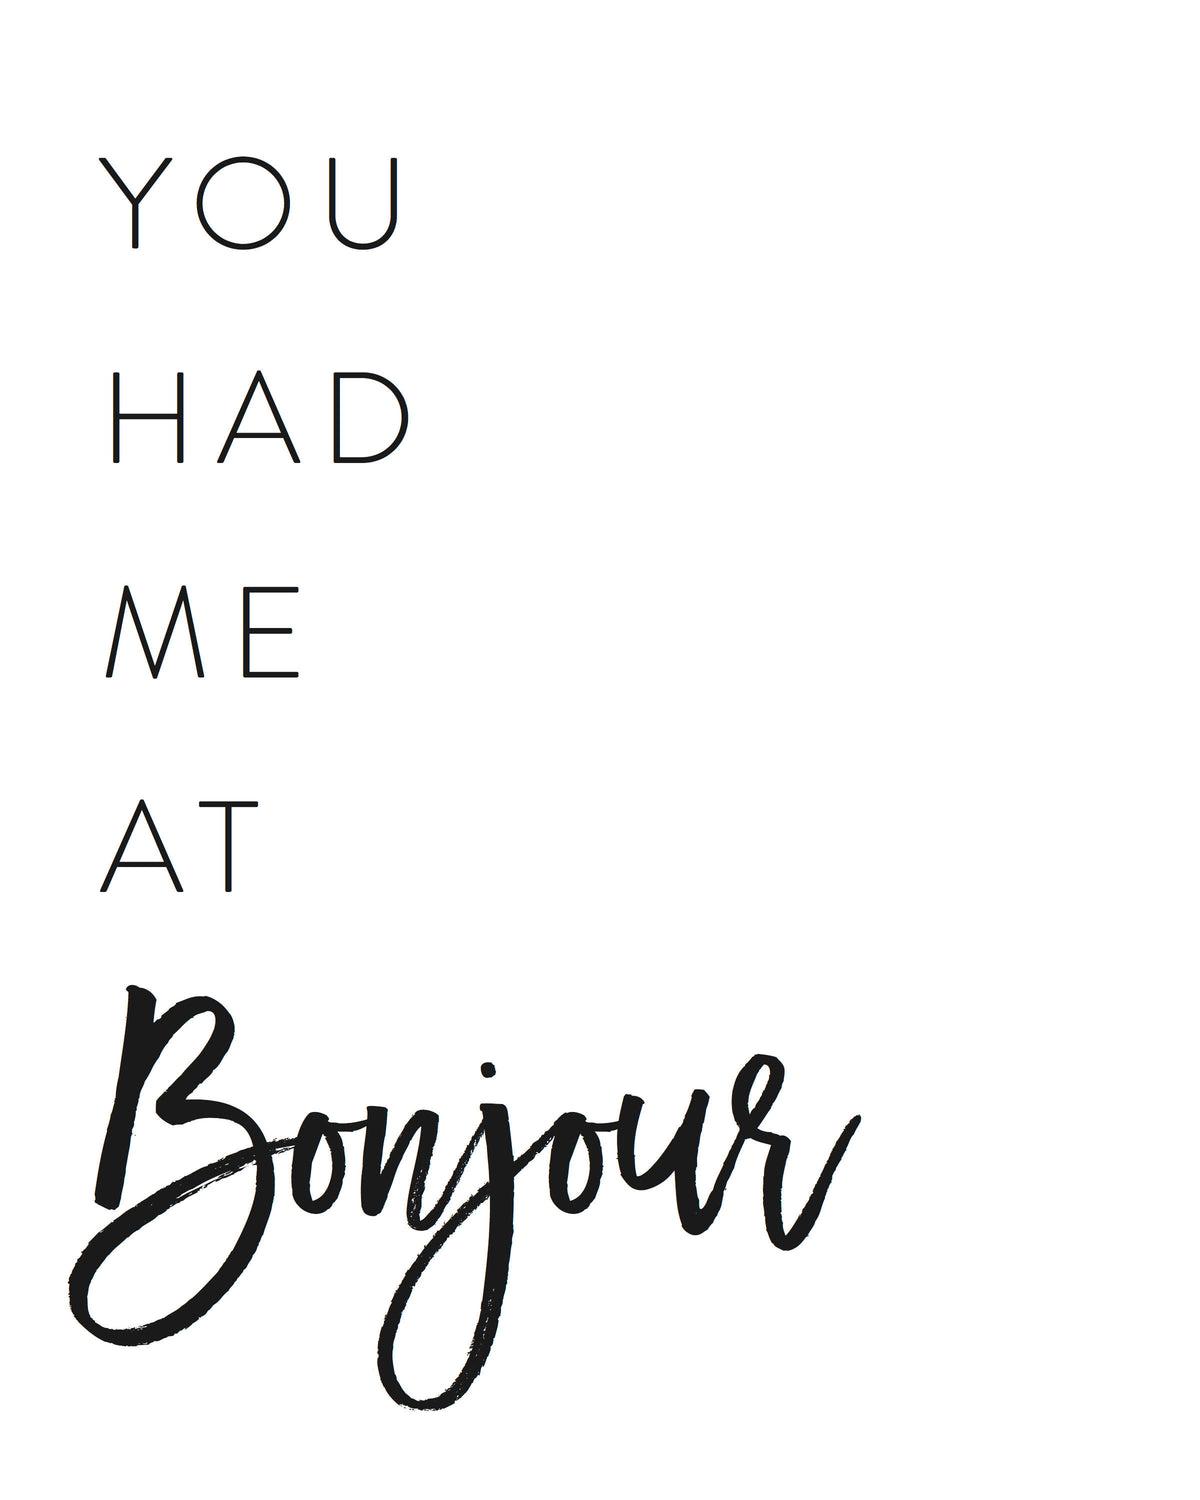 You Had me At Bonjour - Every Day Paris 